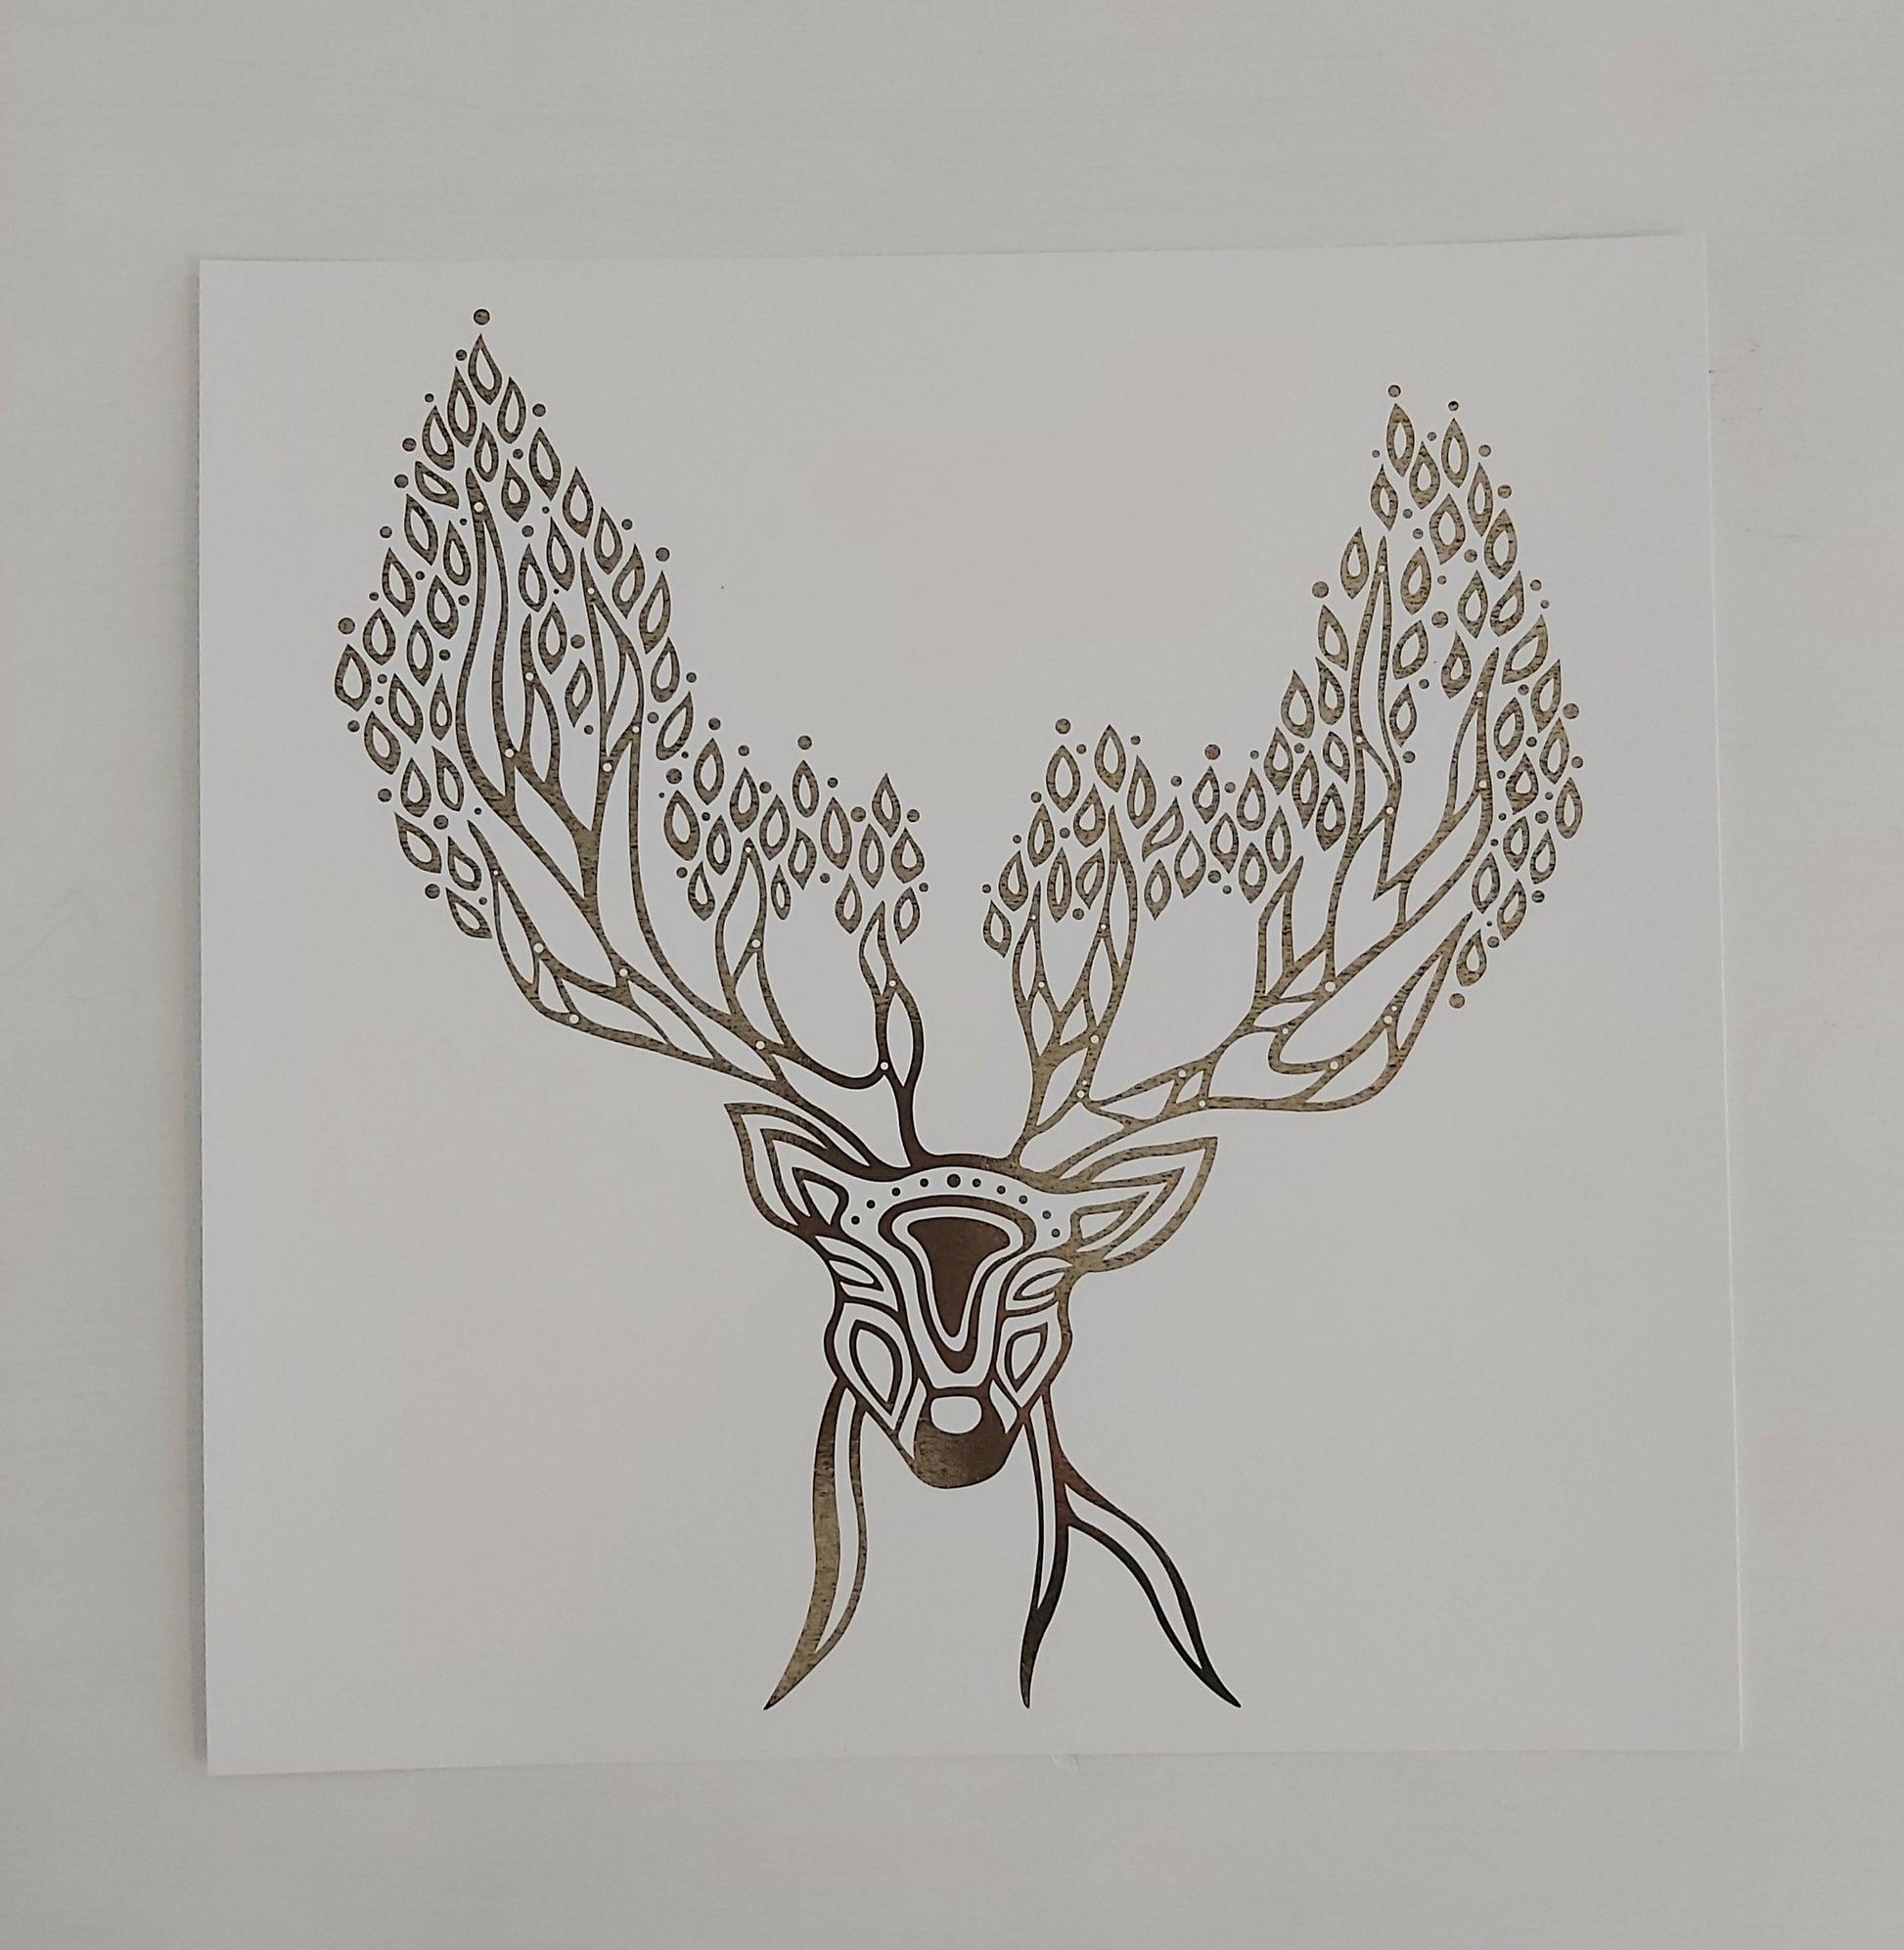 Print of Patrick Hunter's painting of a deer spirit in gold leaf on white in woodland art style.